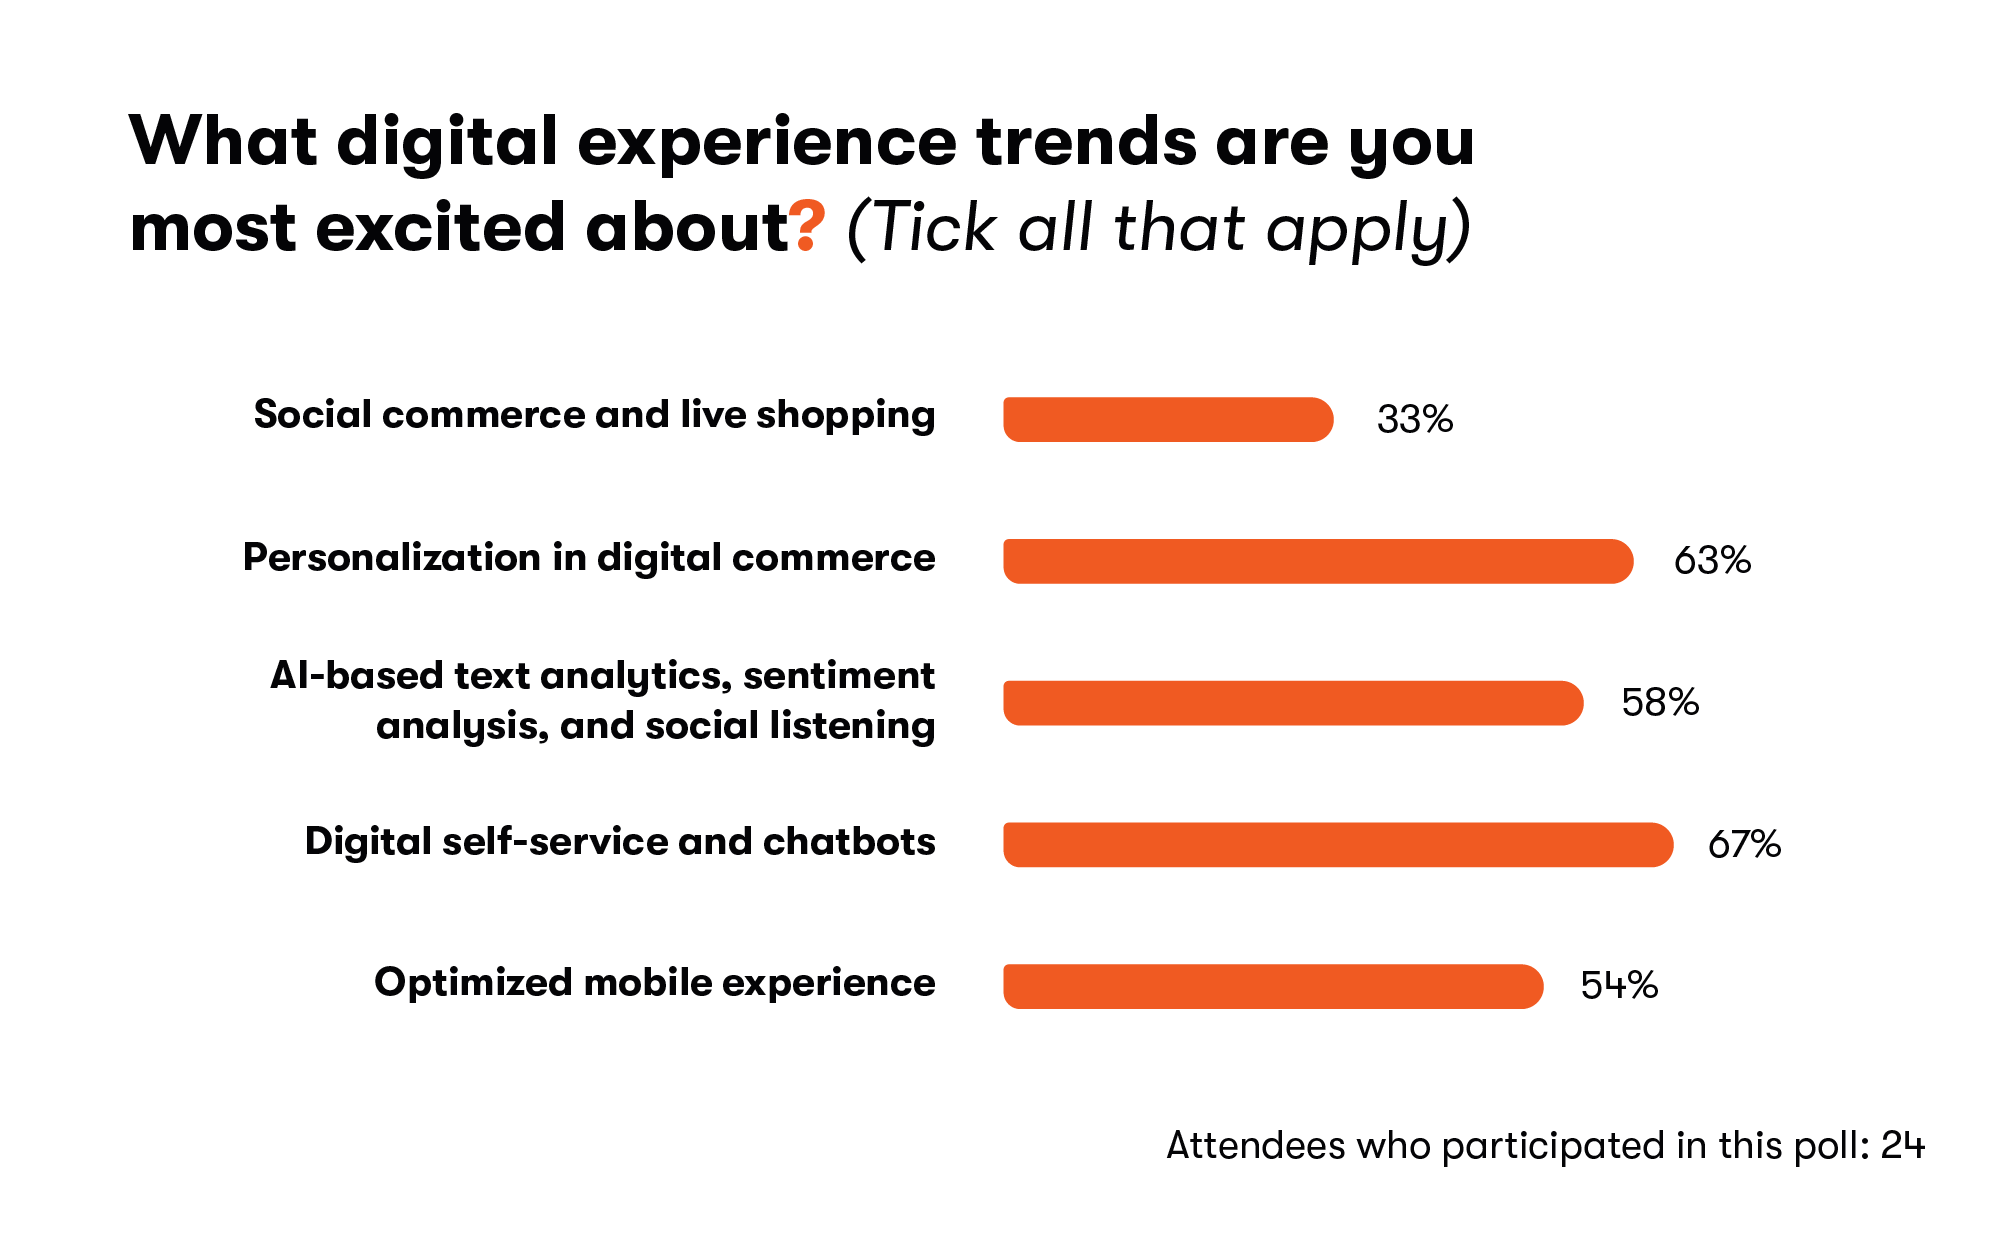 What digital experience trends are you most excited about?